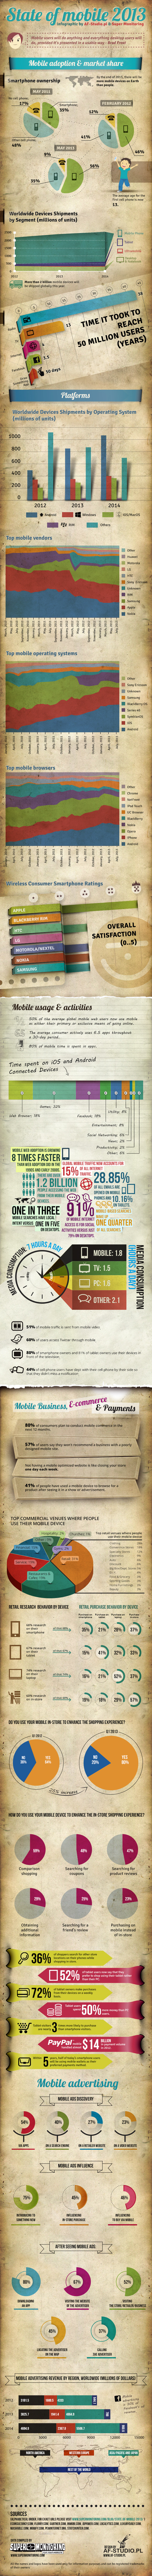 The Stunning State Of Mobile 2013 (Infographic) - viralblog.com